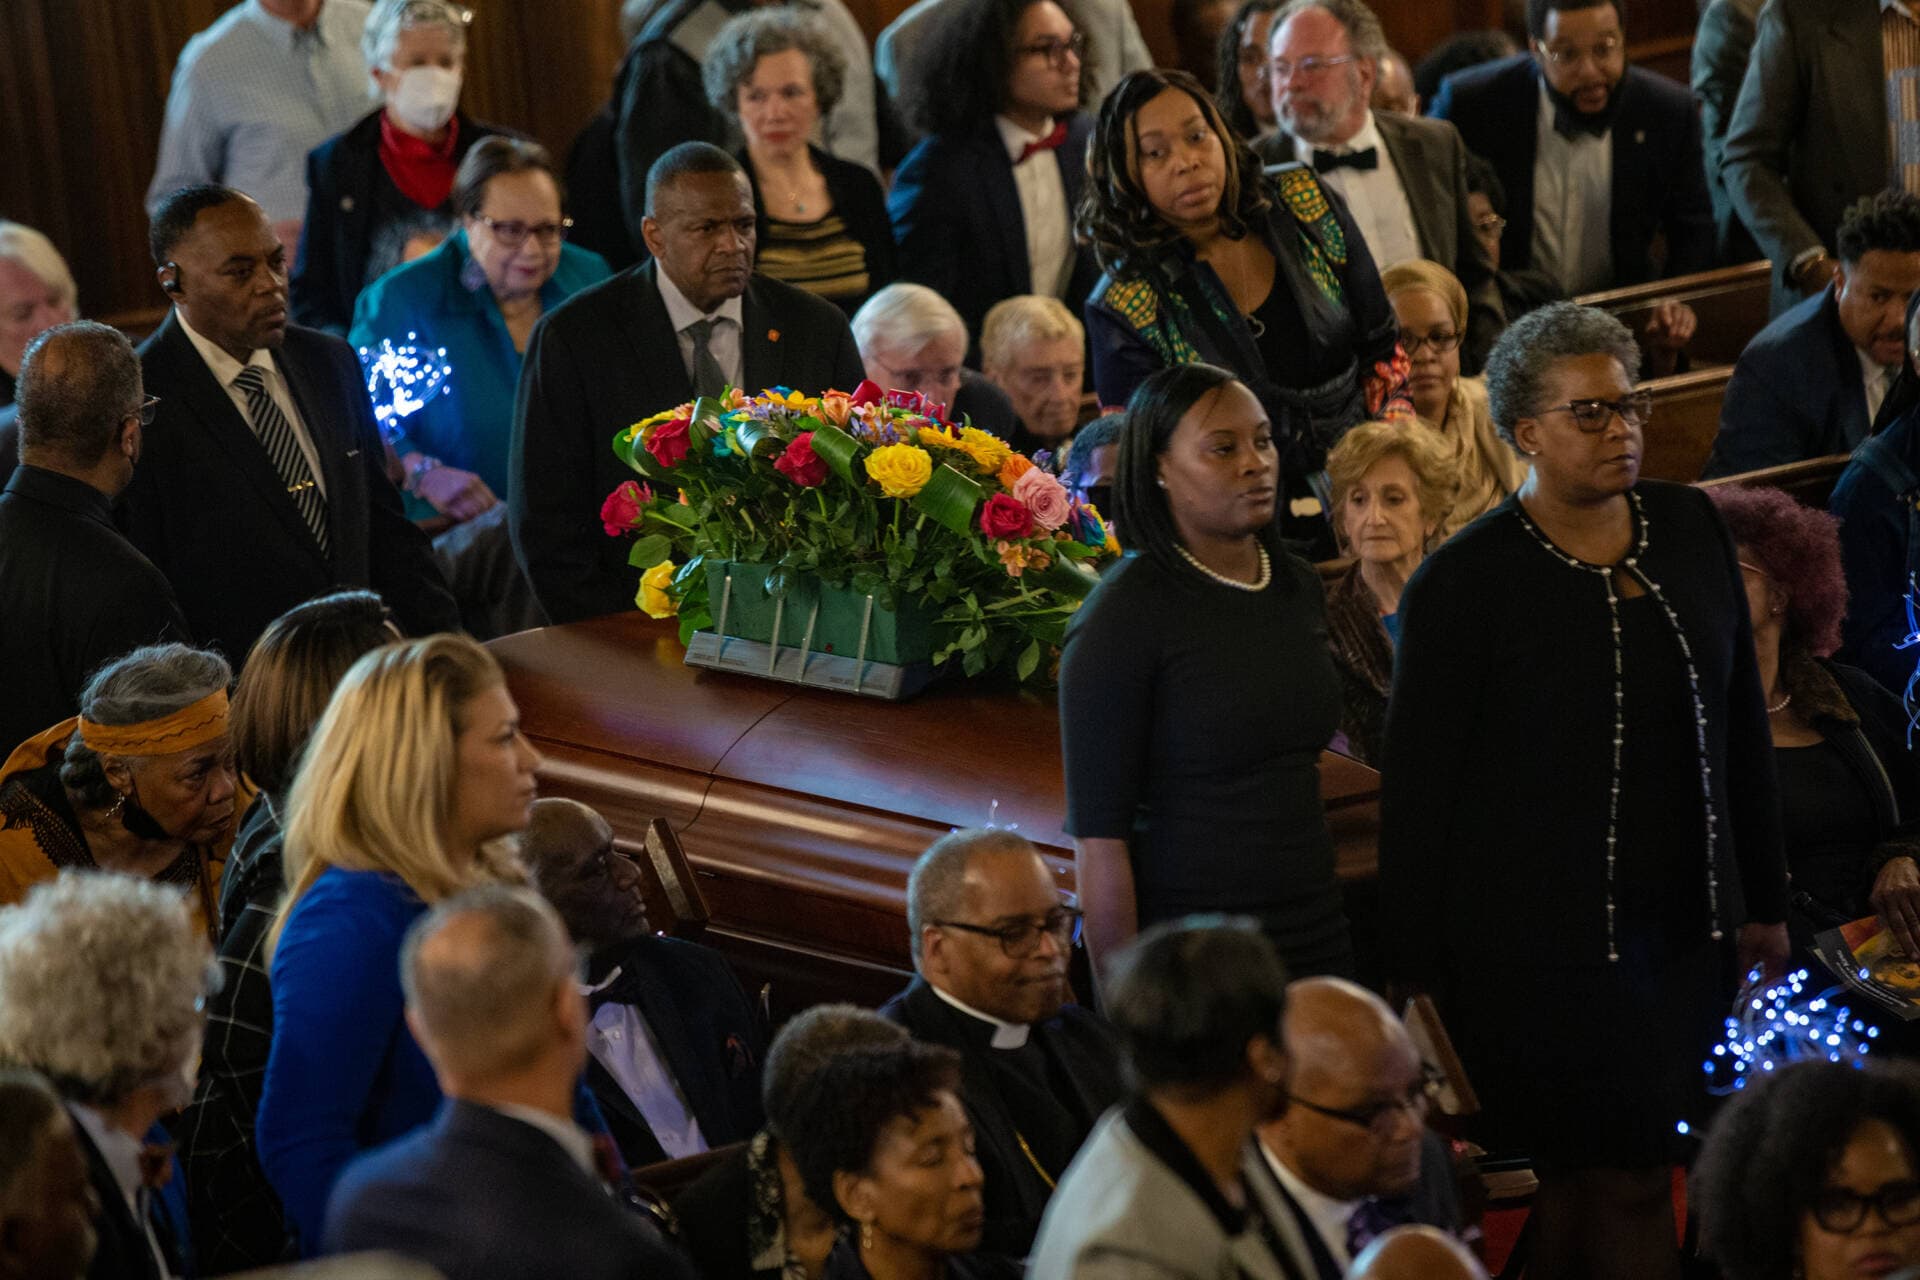 Pallbearers place the casket of Mel King down the aisle during funeral service at Union United Methodist Church in the South End. (Jesse Costa/WBUR)